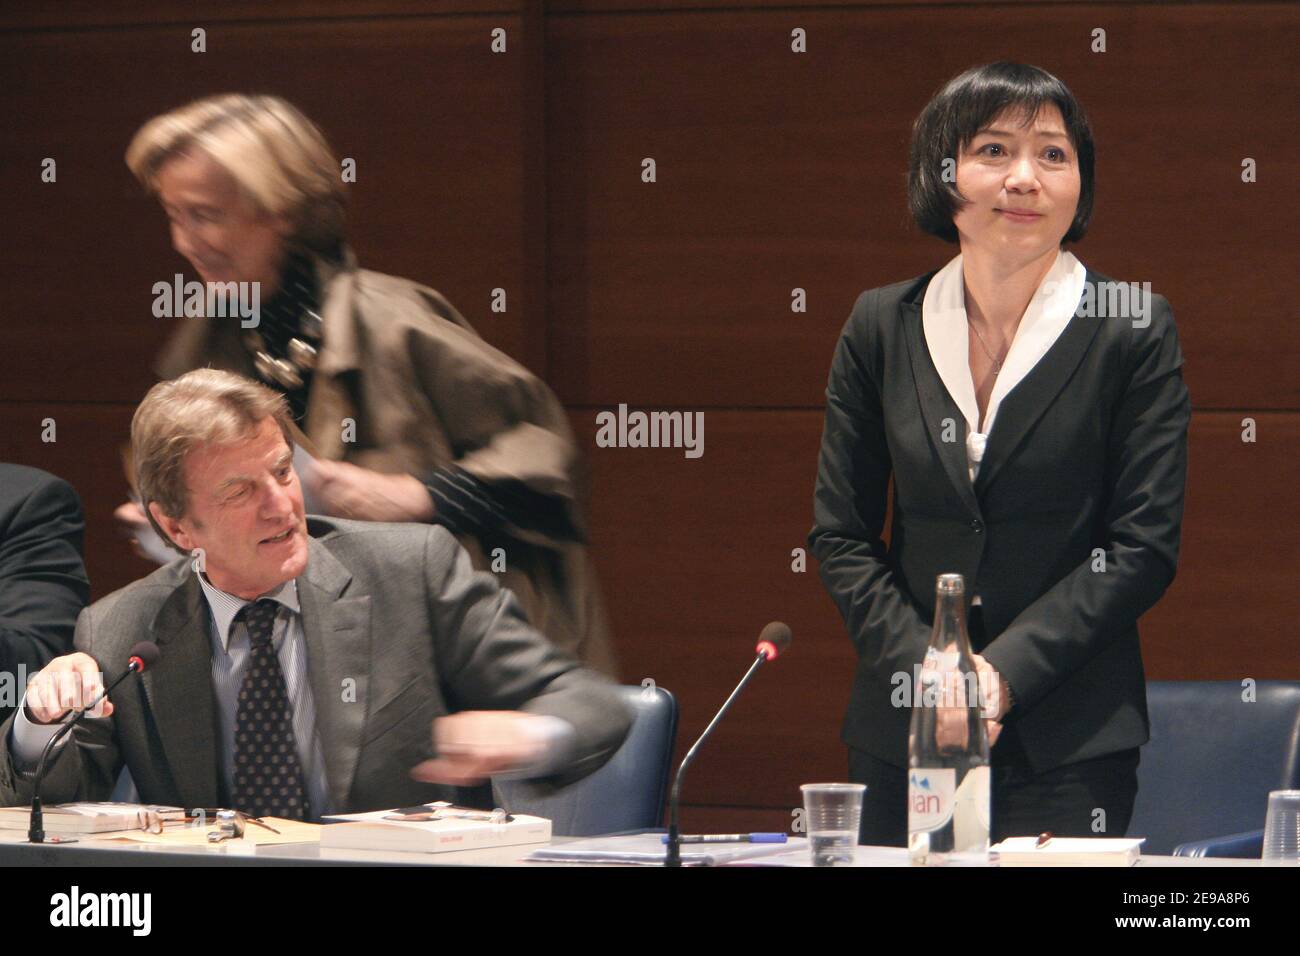 EXCLUSIVE - Bernard Kouchner chairs the conference debate 'Cross Vietnamese Destinies' with President Jacques Chirac's adoptive daughter Anh-Dao Traxel, a Vietnamese refugee in Paris, France on May 15, 2006. Photo by Mehdi Taamallah/ABACAPRESS.COM Stock Photo